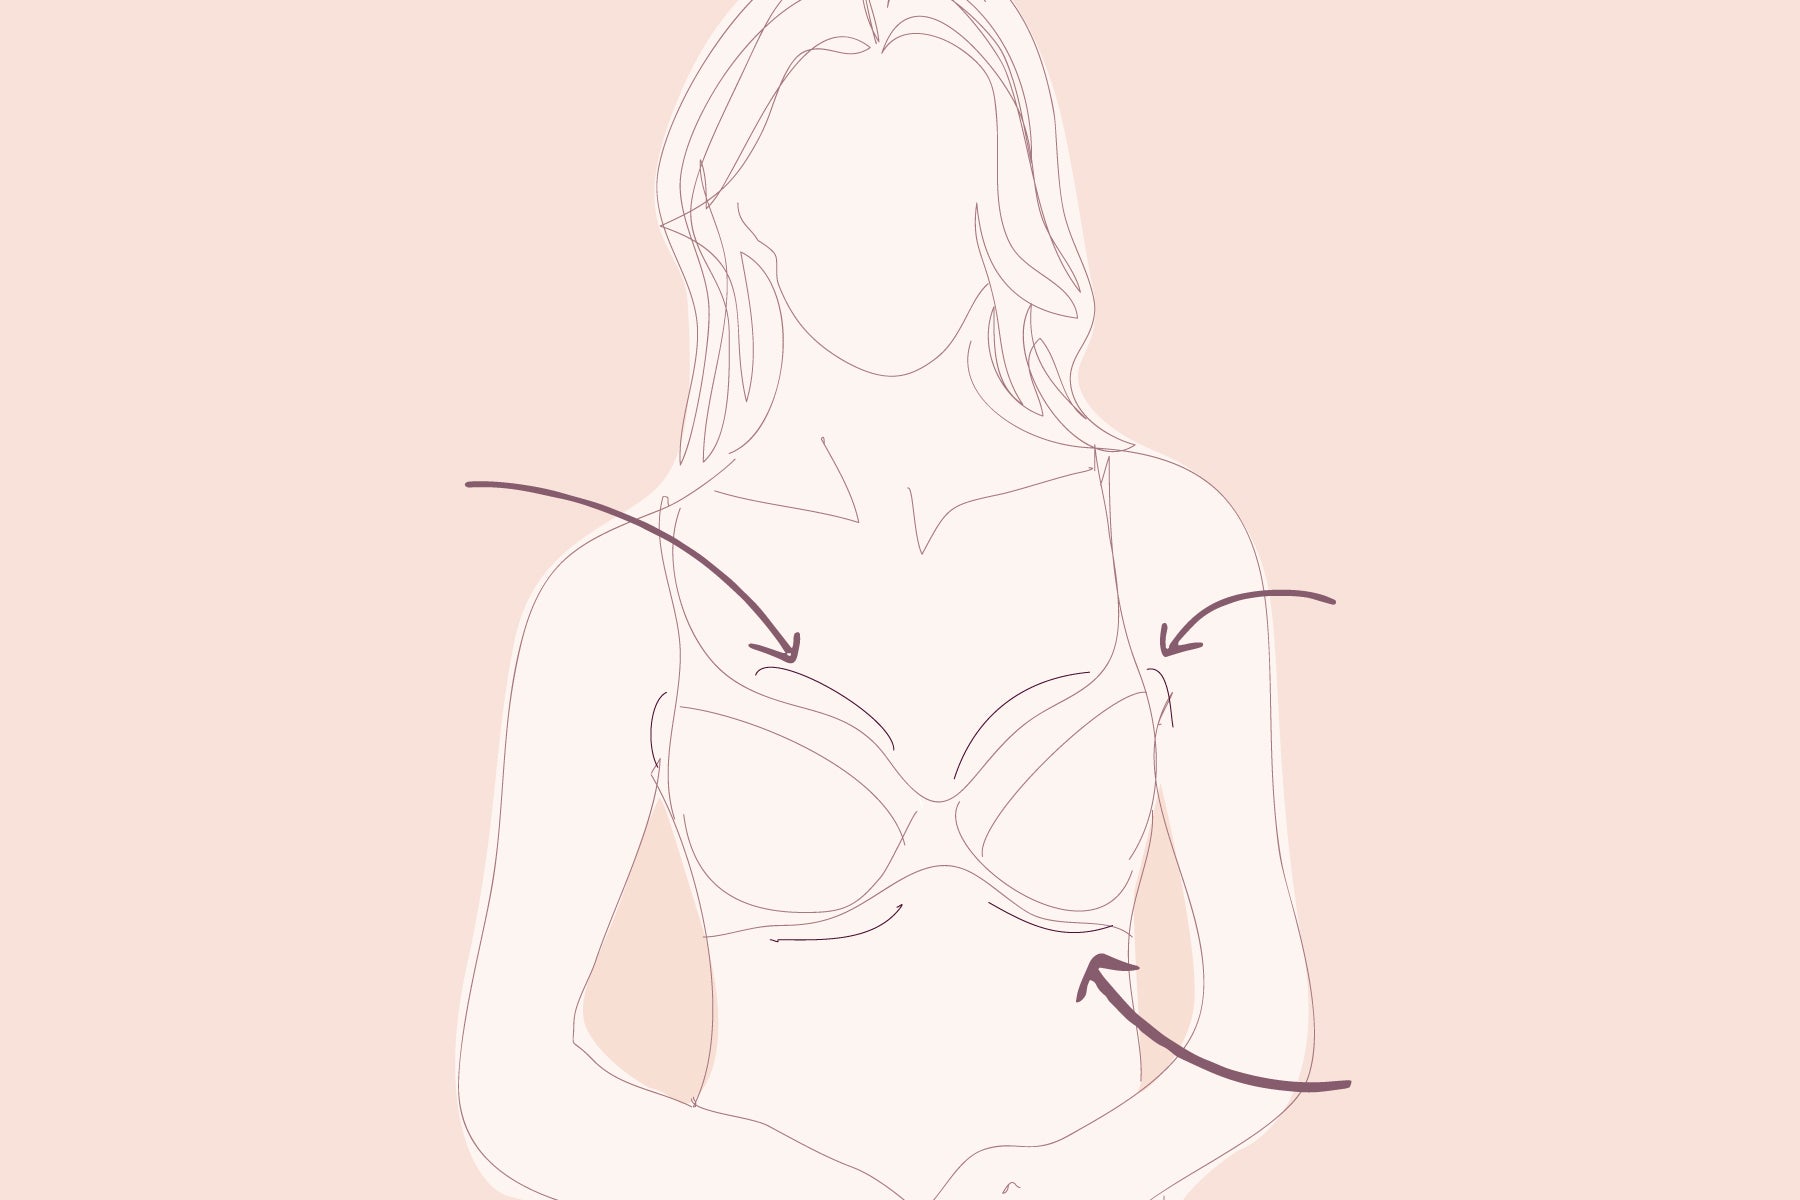 Sketch showing where bras often don't fit well